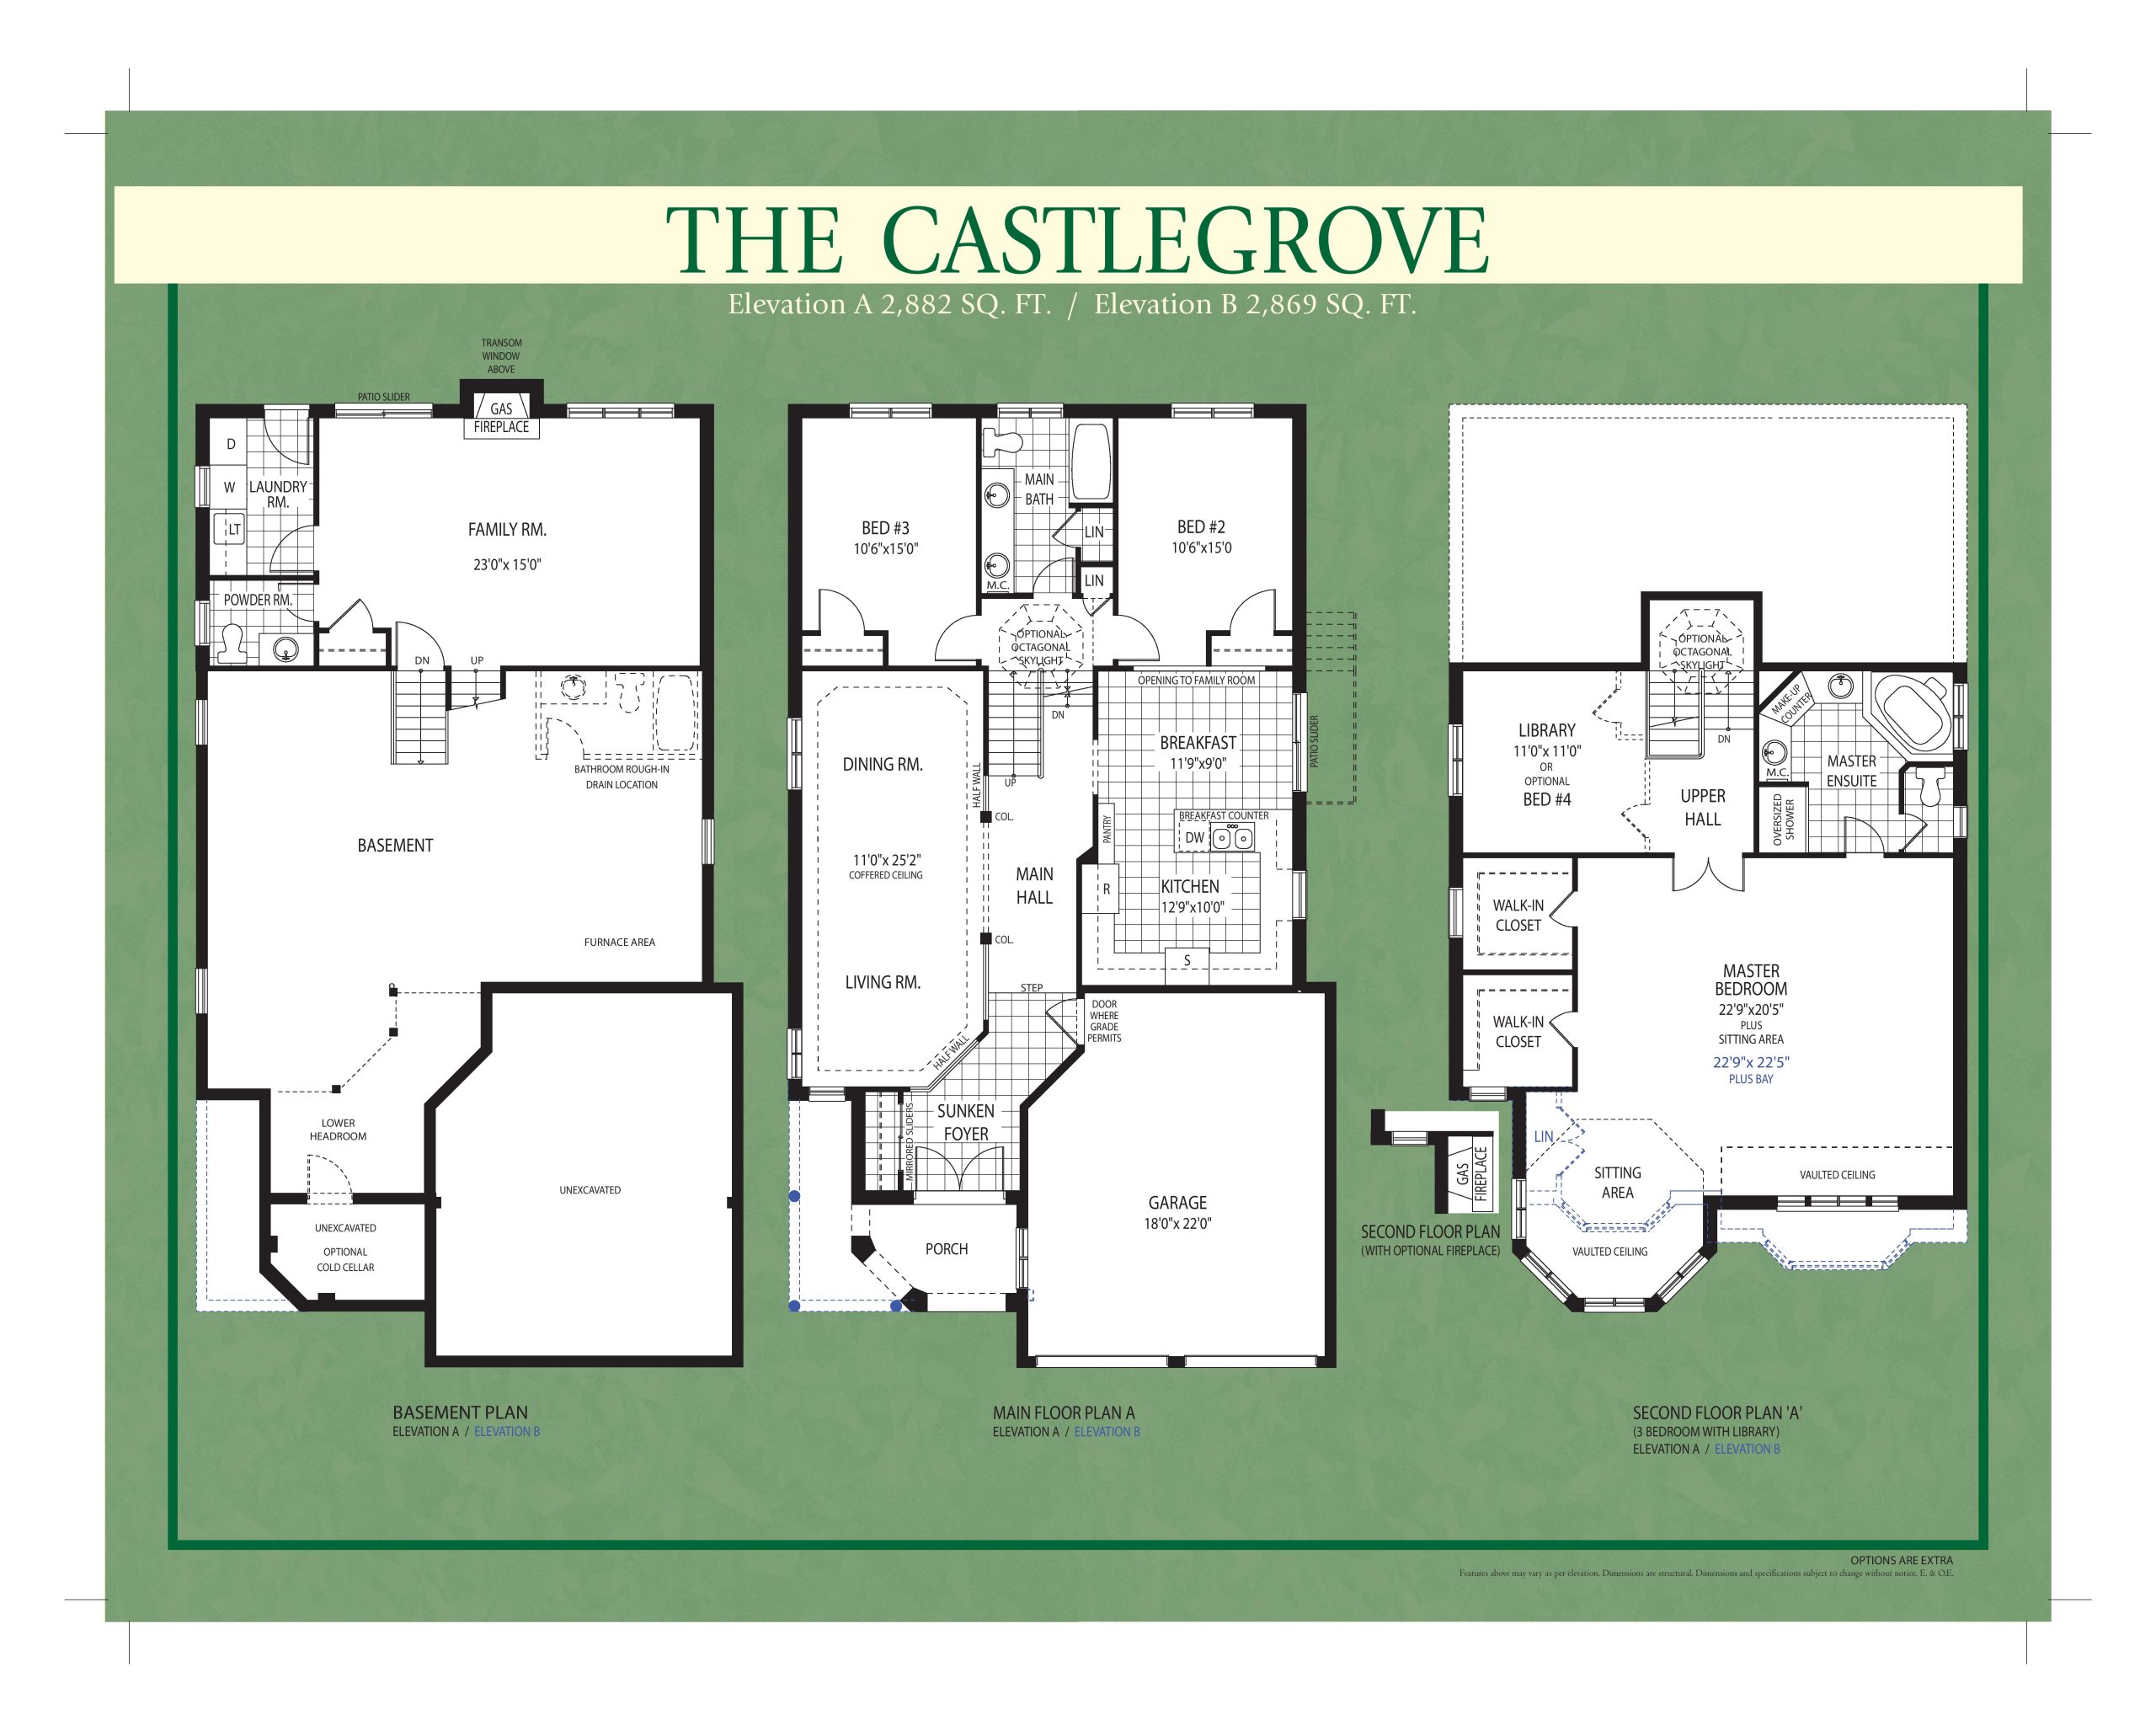  Floor Plan of Eagle Woods with undefined beds